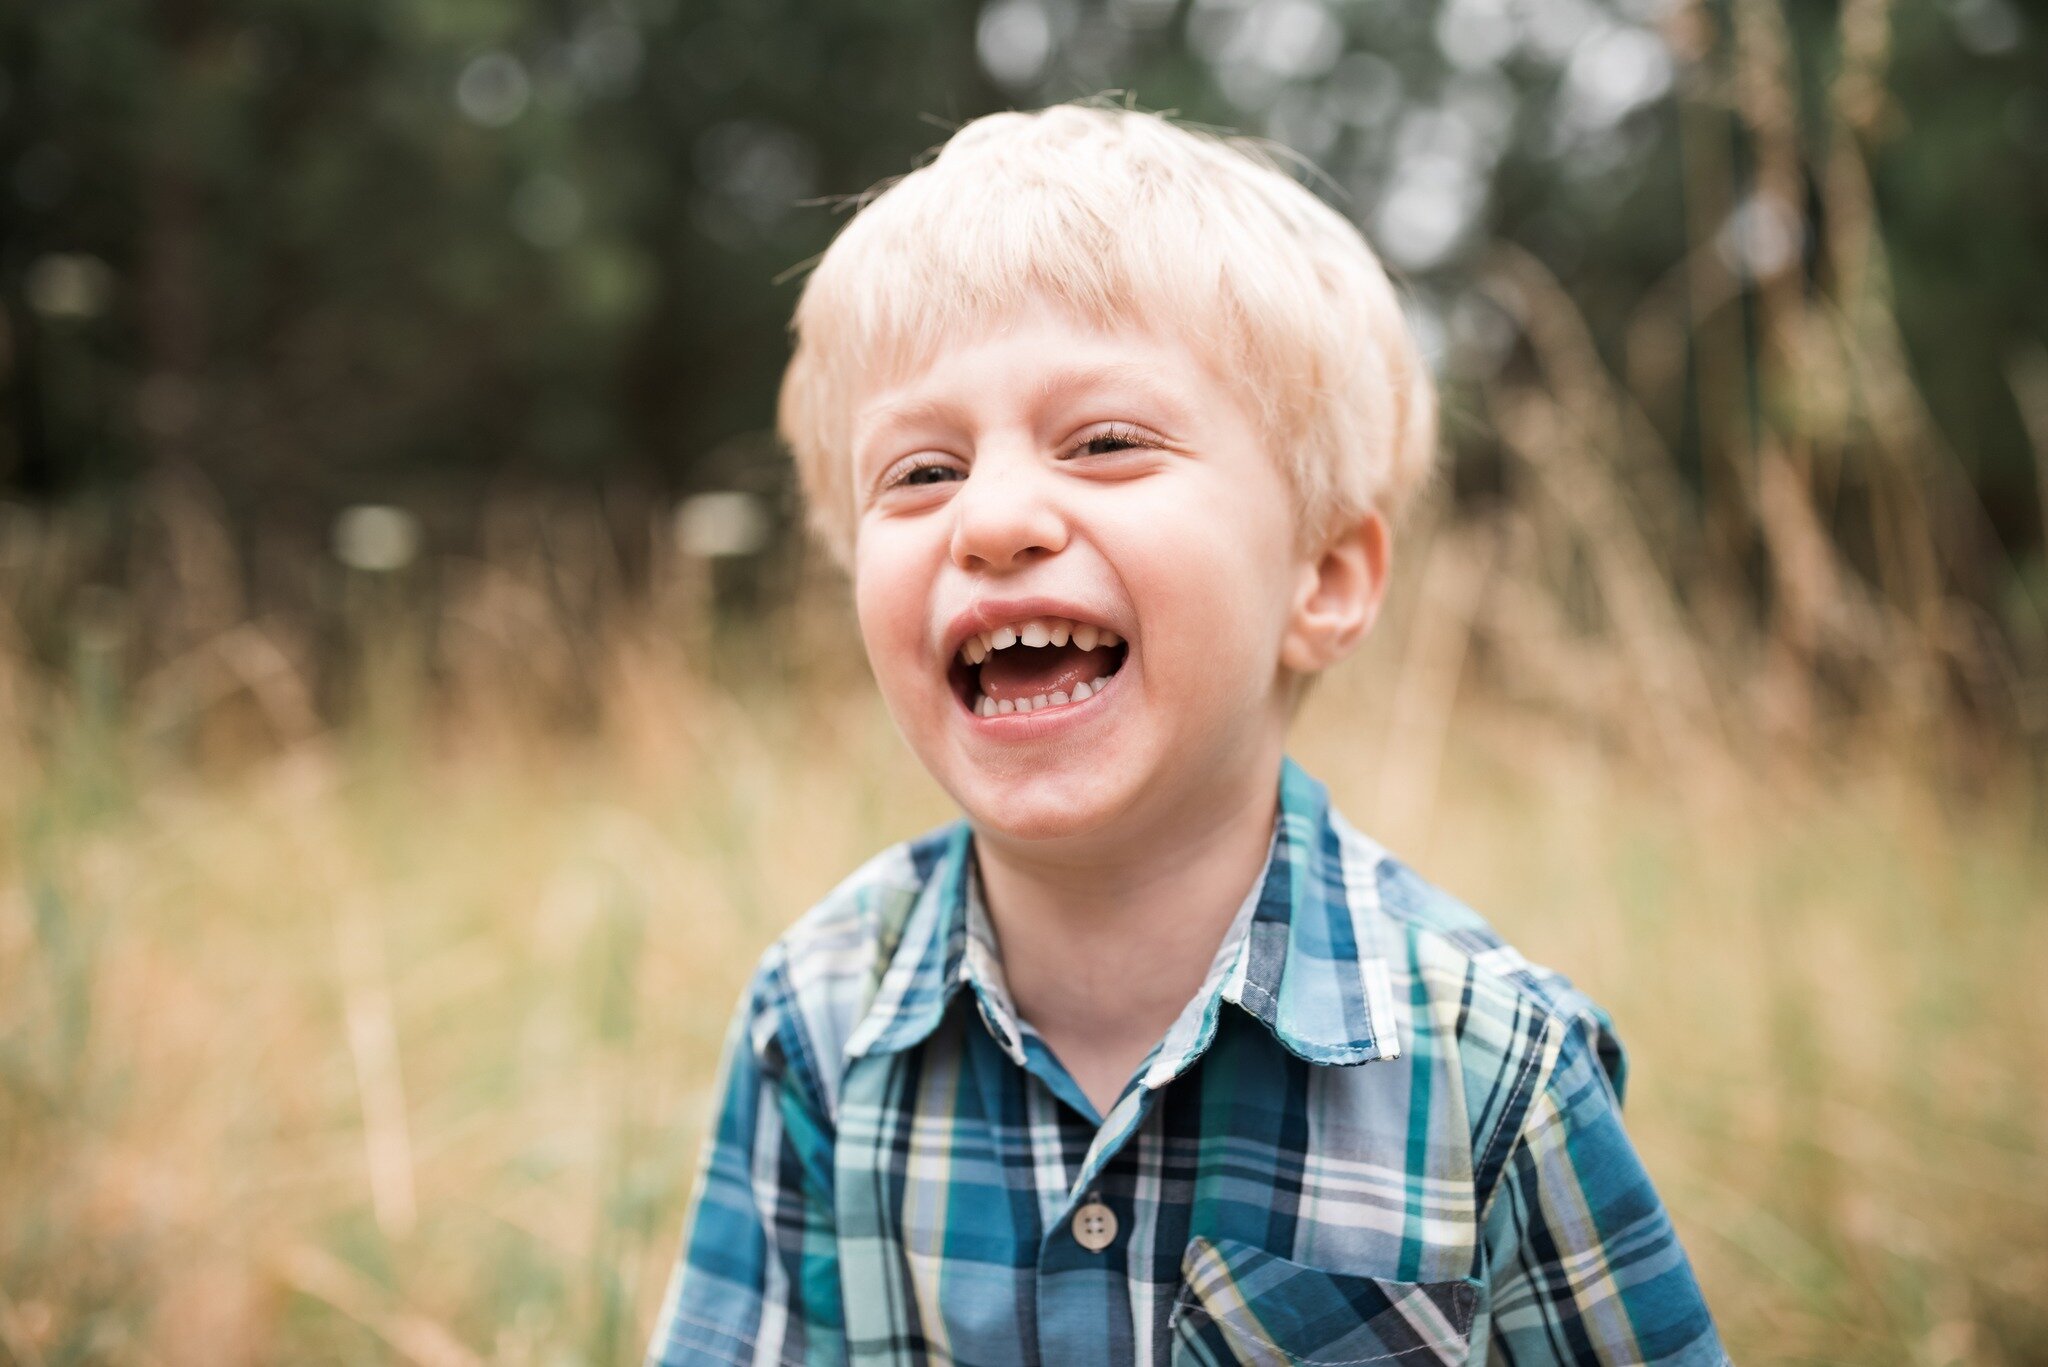 Pure joy in every giggle! 💫 There's nothing quite like the sound of a child's laughter, echoing through the air like music to the soul. It's a melody of innocence, boundless imagination, and pure happiness that reminds us of the magic woven into eve